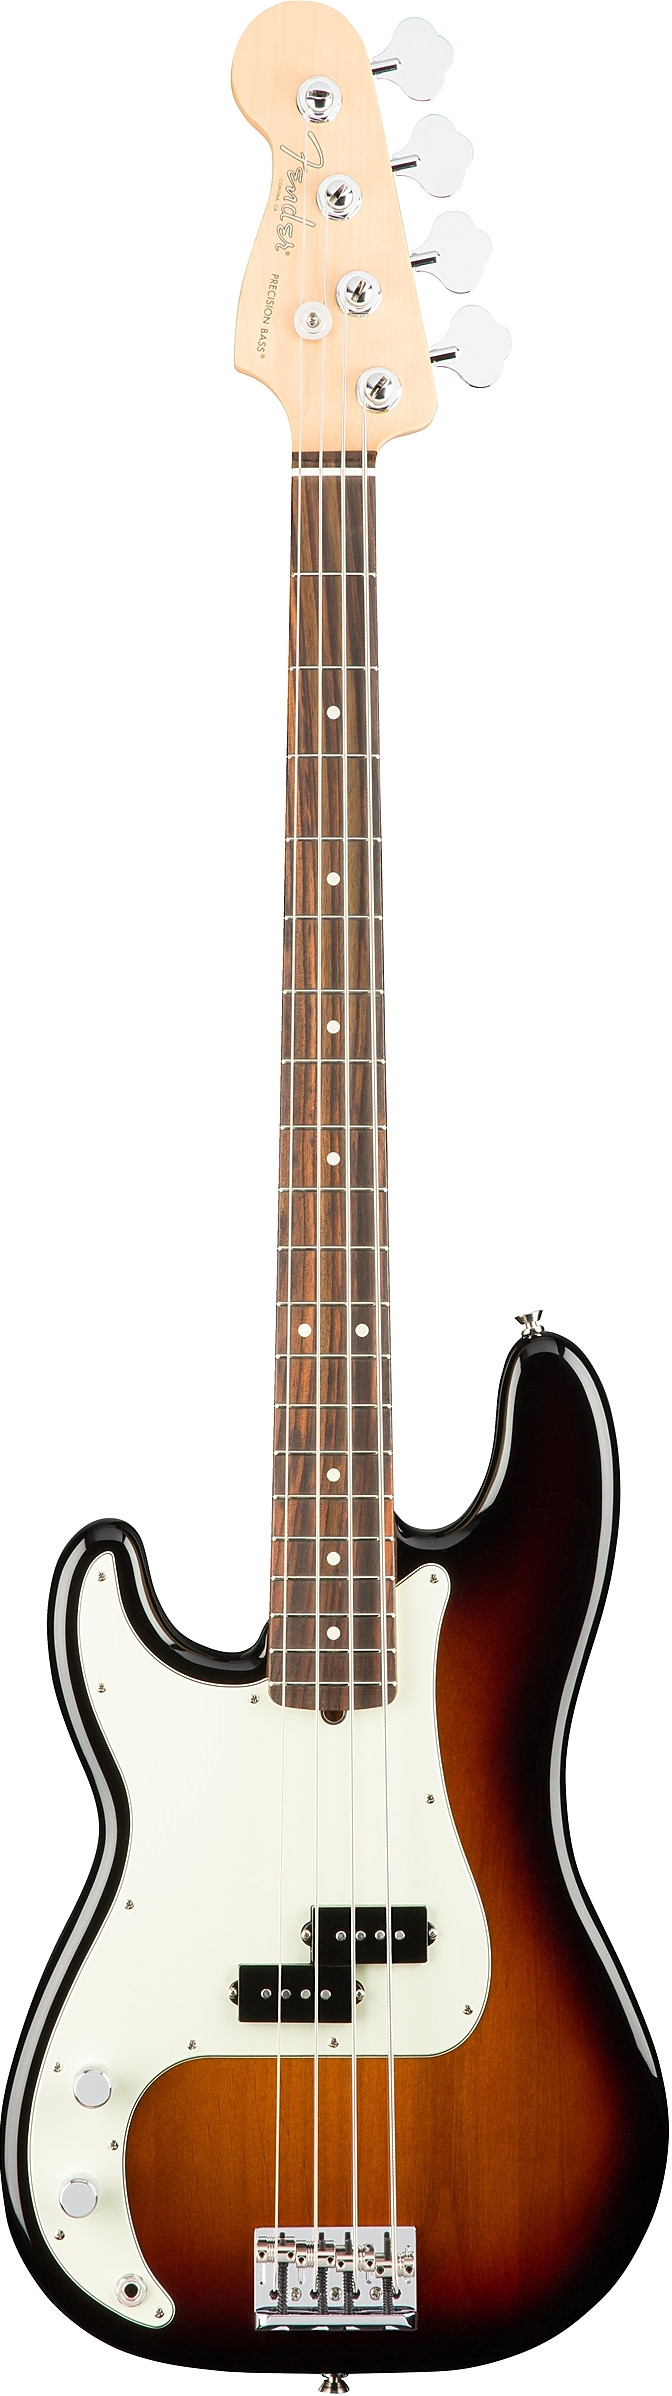 American Professional Precision Bass Left Hand by Fender